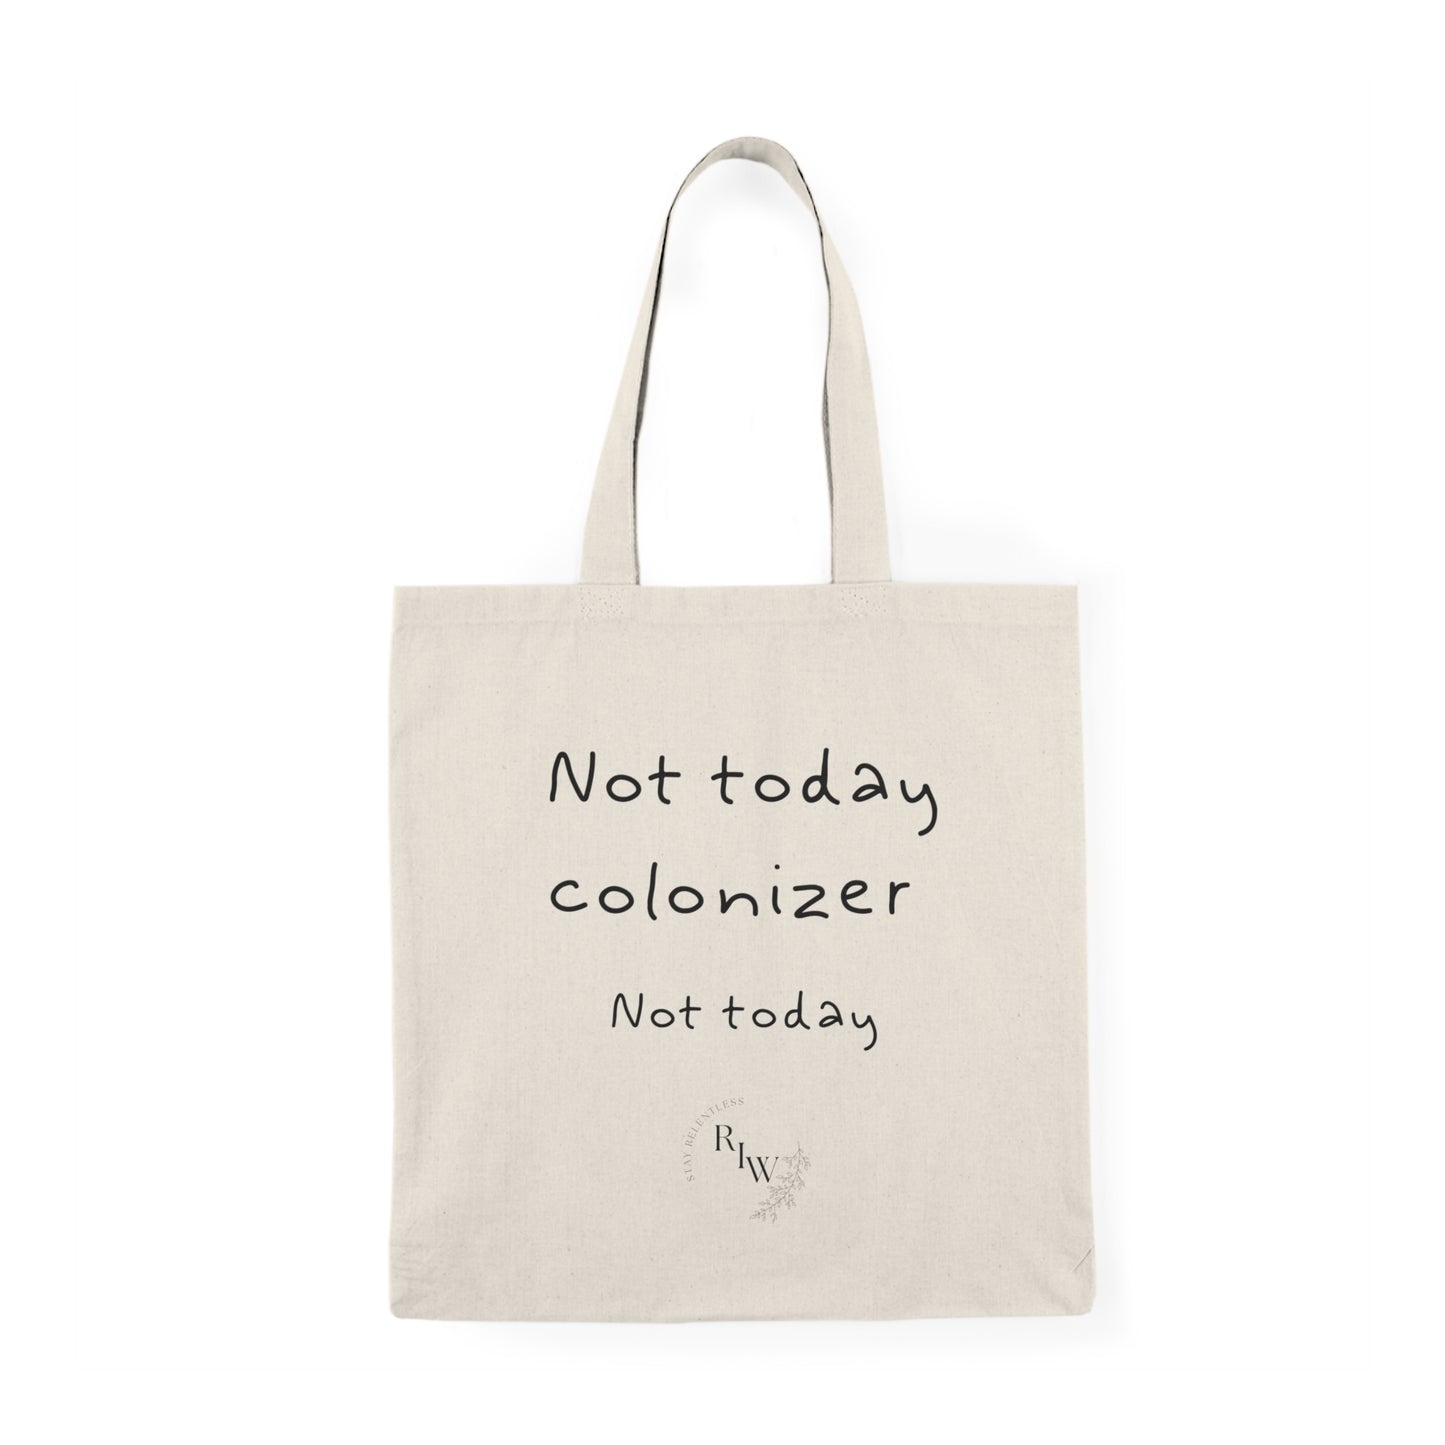 Not Today, colonizer, Not Today // Tote Bag